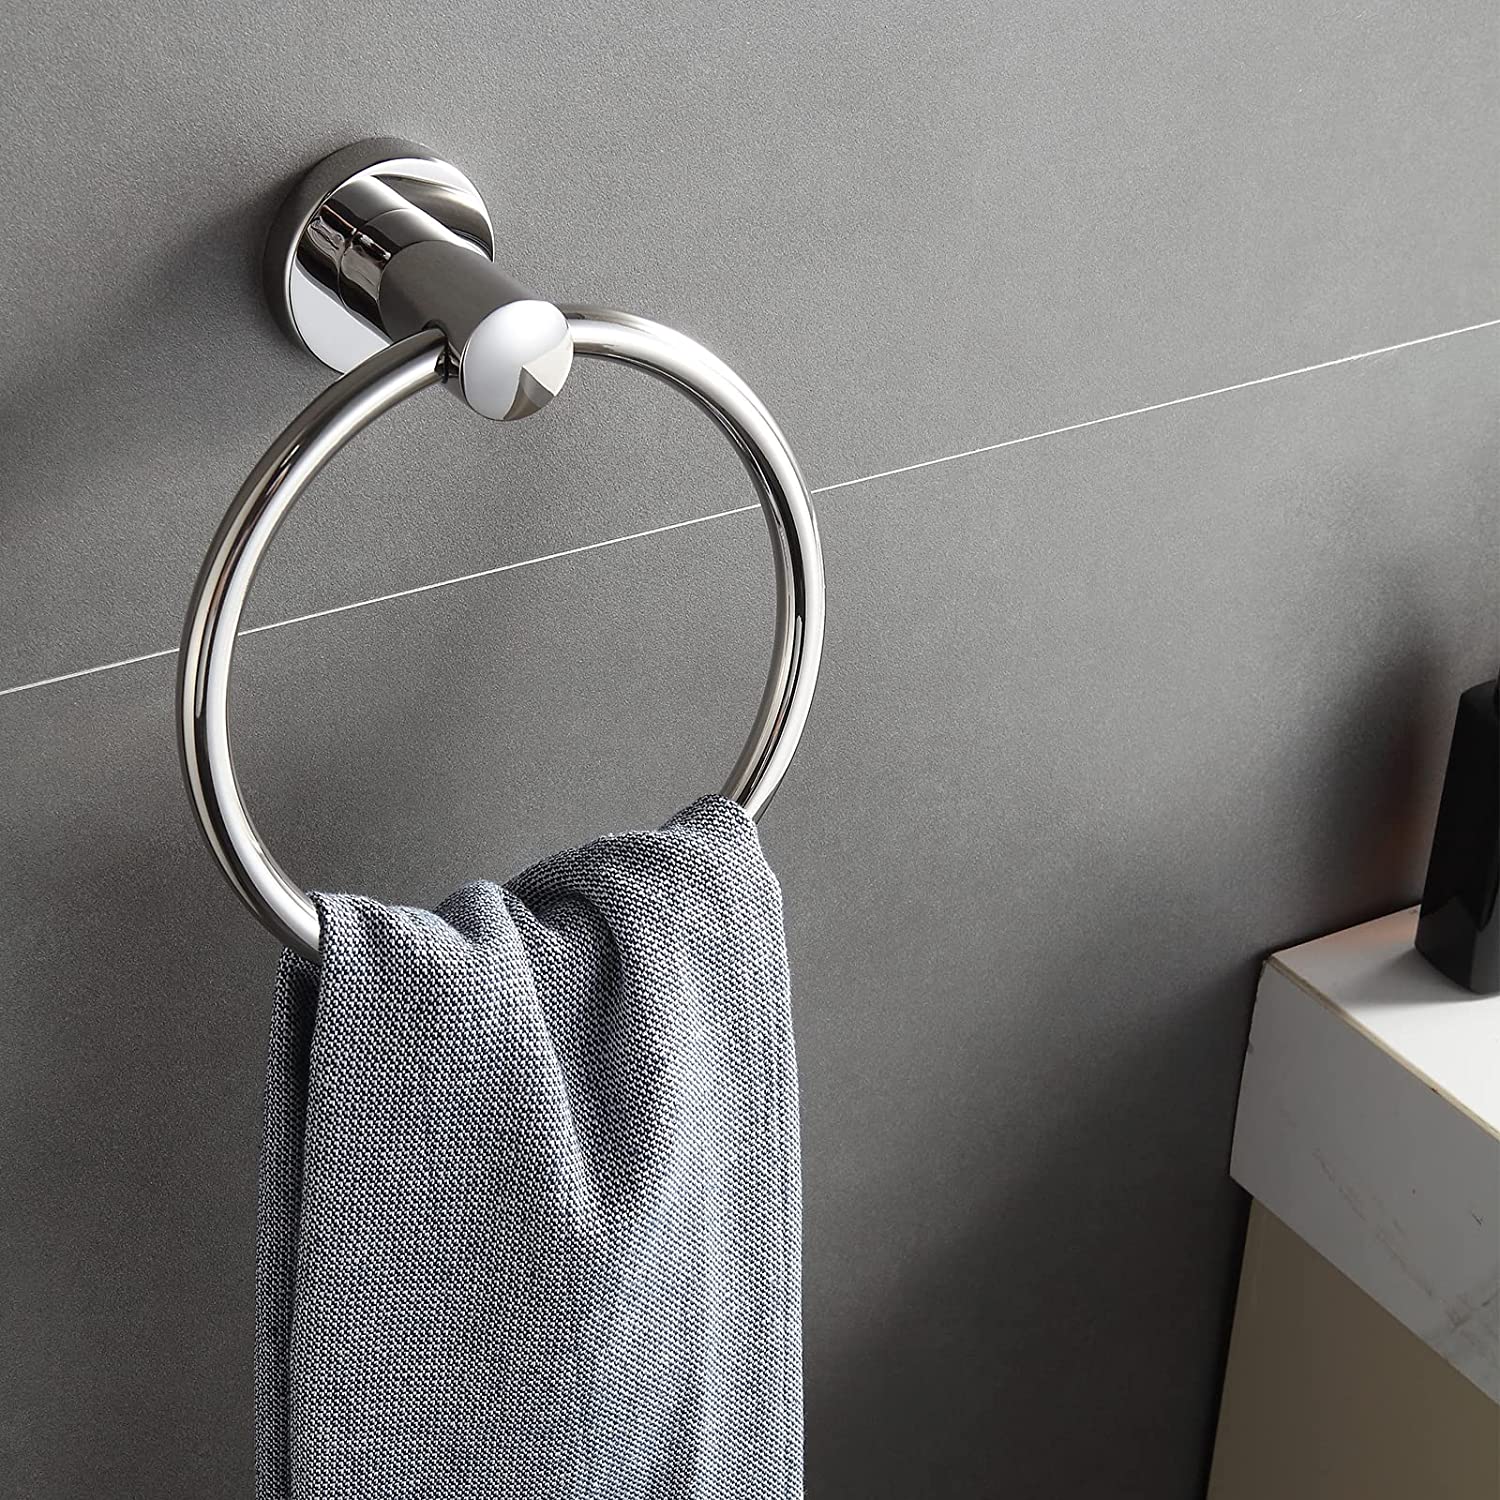 ALAMANIA Stainless Steel Towel Holder Ring16cm (6.3inch) With Fixing kit For Bathroom & Kitchen Hand Towel Hanging Towel Hanger Round Towel Rail.